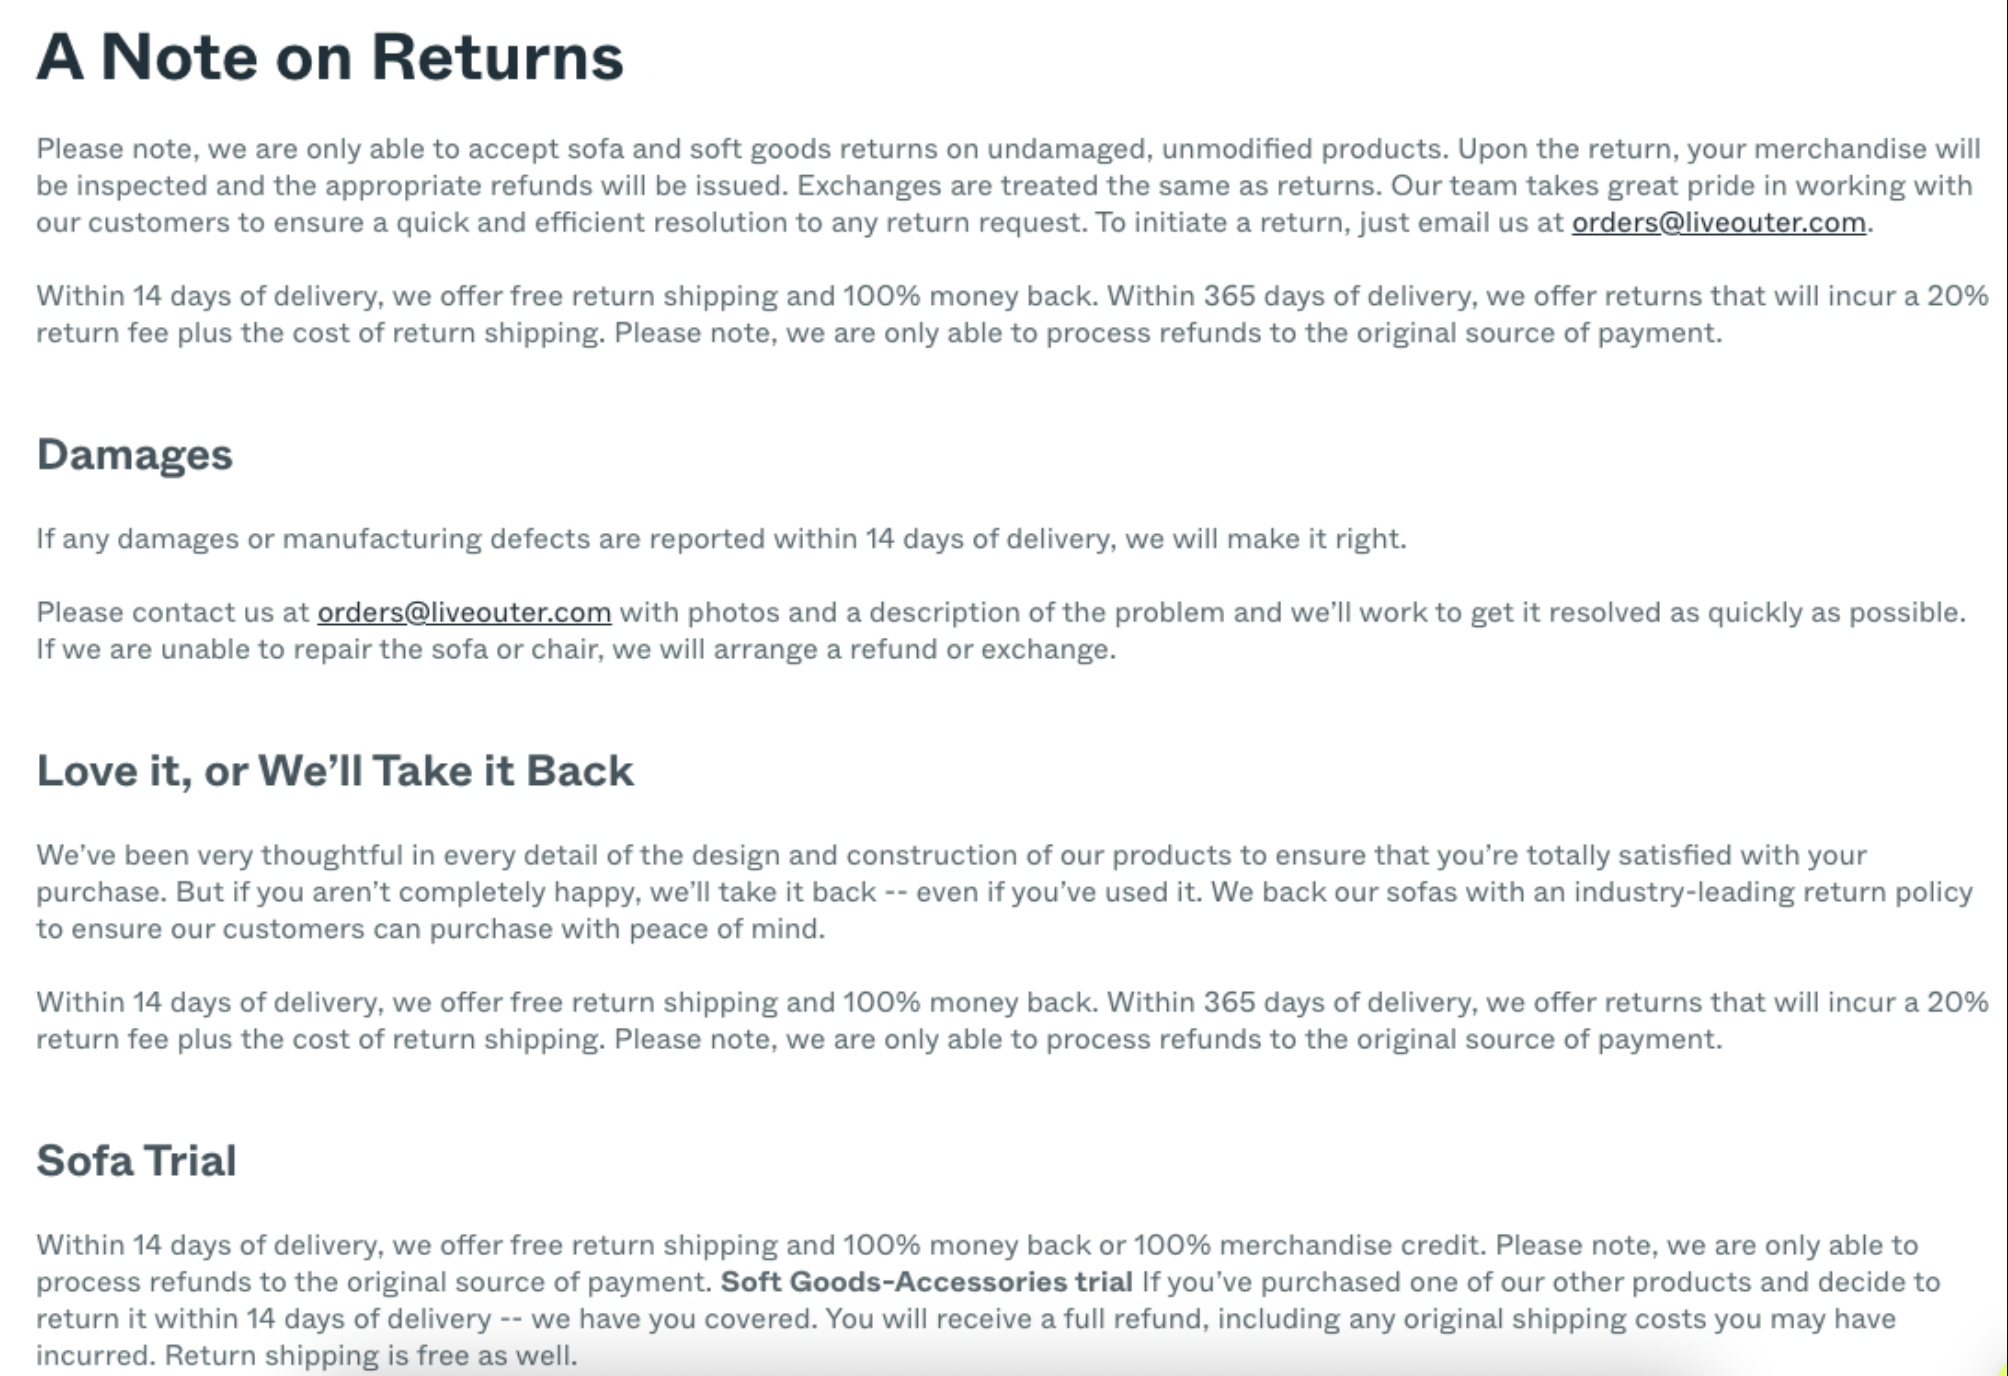 Returns/Exchanges Policy